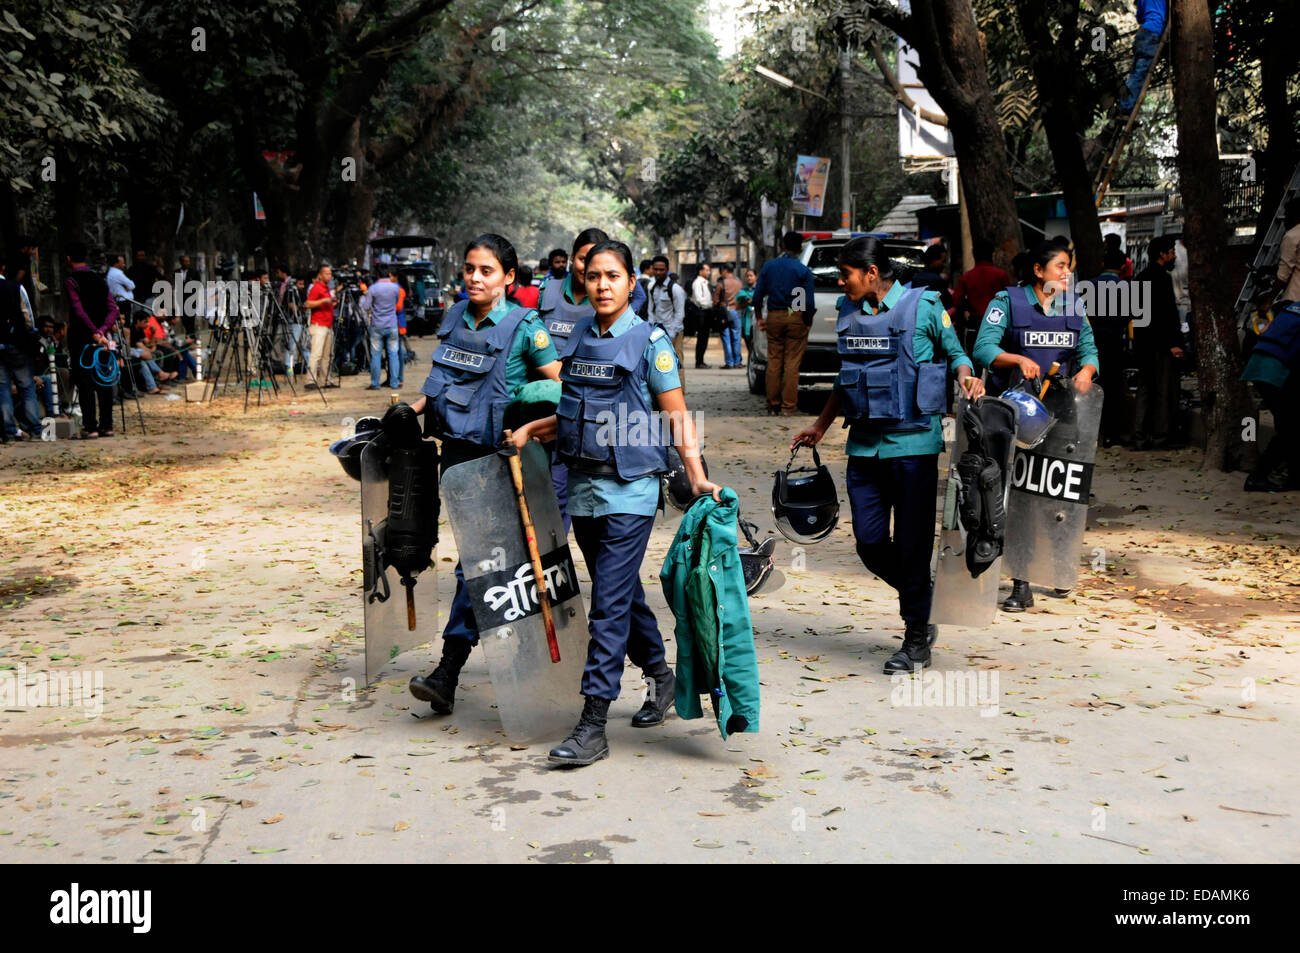 (150104) -- DHAKA, Jan. 4, 2015 (Xinhua) -- Bangladeshi policewomen stand guard near the residence of former Prime Minister Khaleda Zia in Dhaka, Bangladesh, Jan. 4, 2015. Bangladesh's former prime minister Khaleda Zia, also chairperson of BNP, has remained cordoned off inside her office in capital Dhaka's Gushan diplomatic enclave since Saturday night. Police have also locked down the BNP's headquarters after searching it. (Xinhua/Shariful Islam)(zhf) Stock Photo